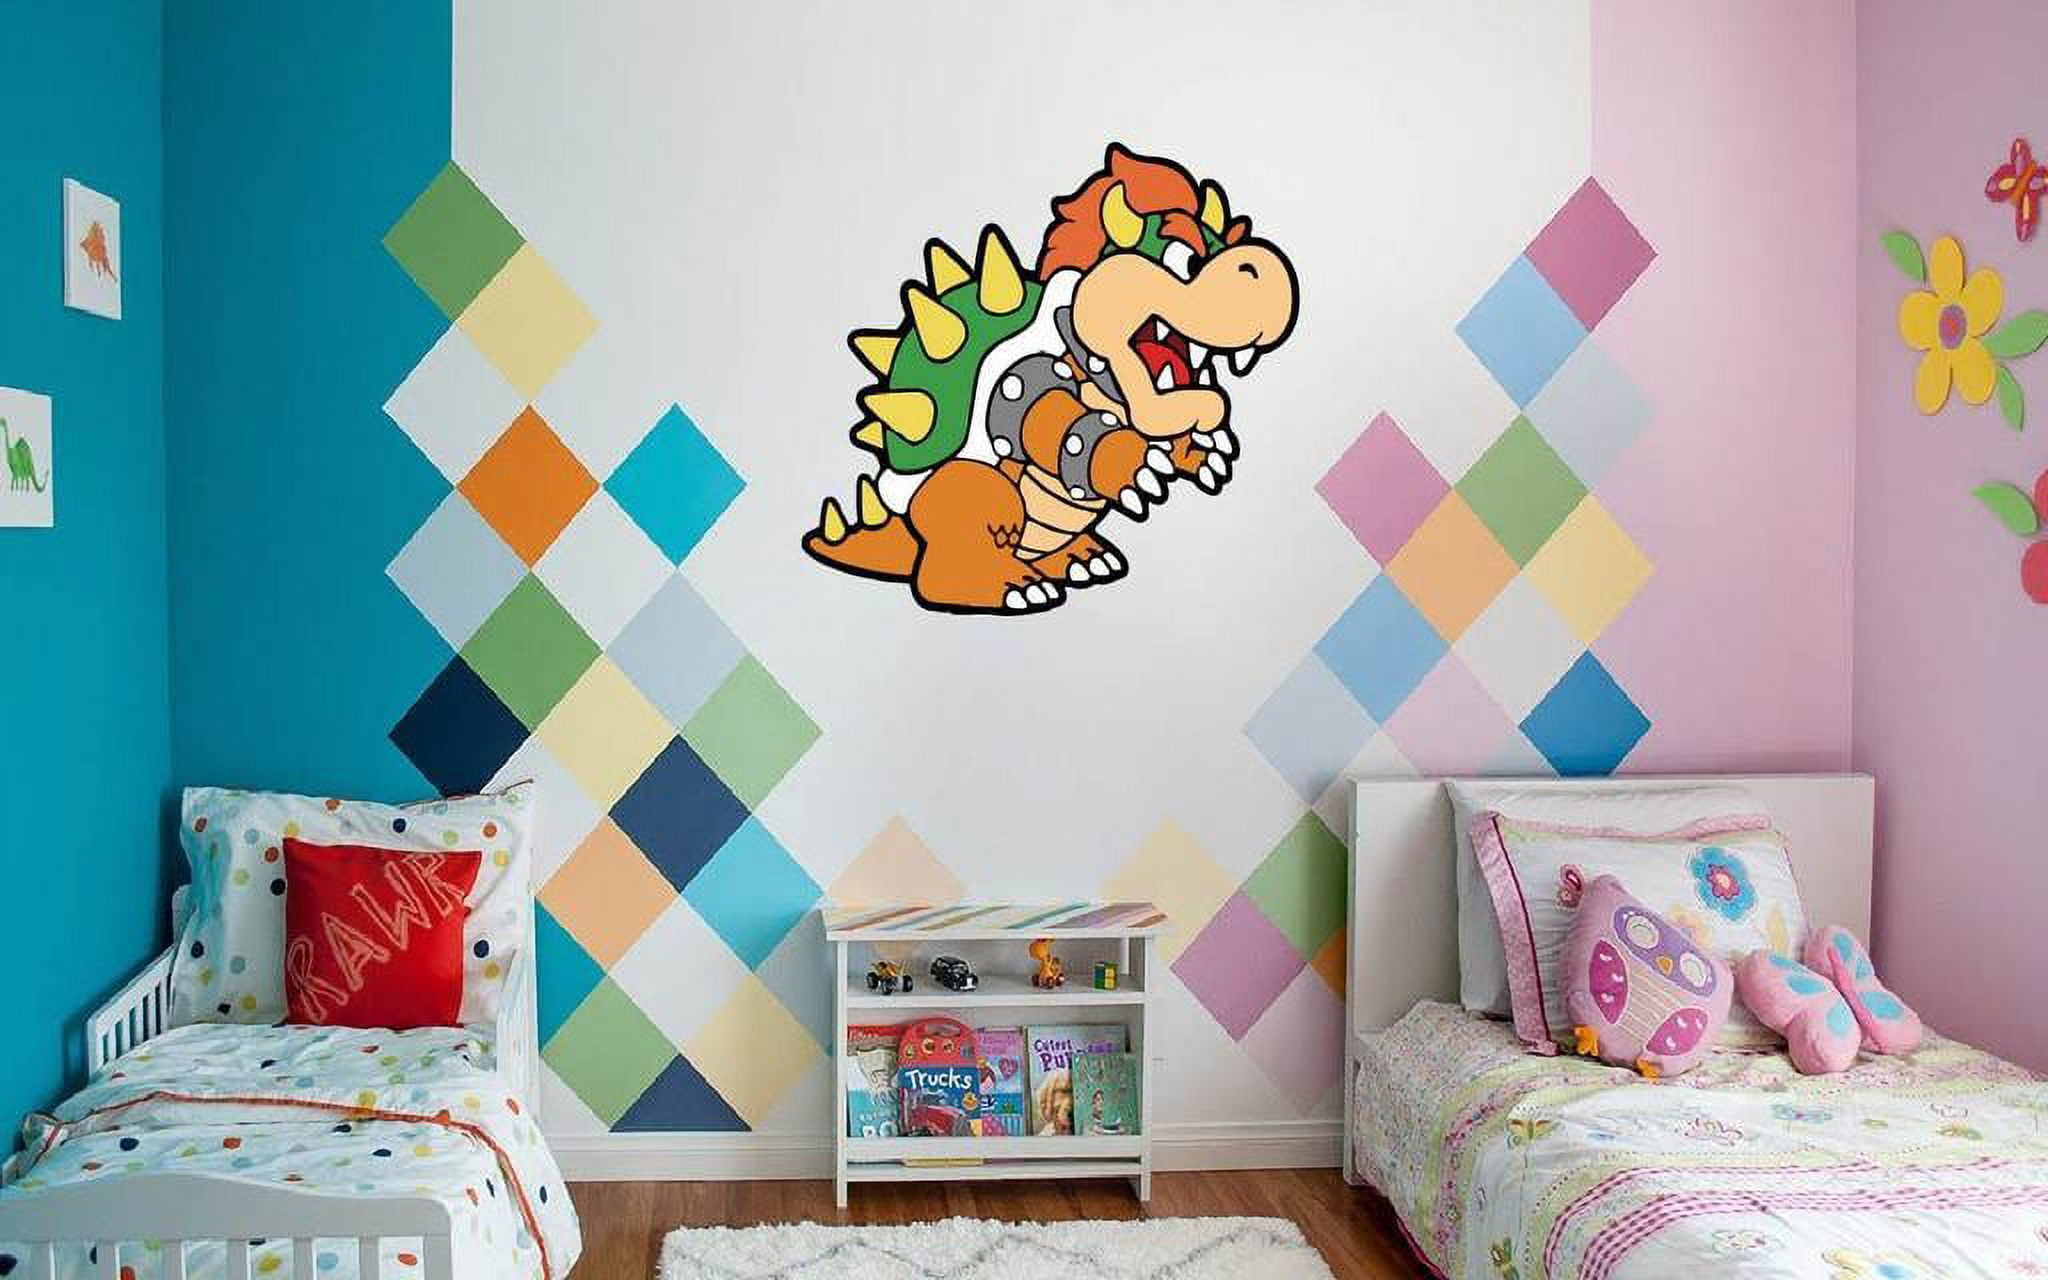 Mario Kart™ 8: Mario and Bowser Collision Mural - Officially Licensed  Nintendo Removable Wall Adhesive Decal